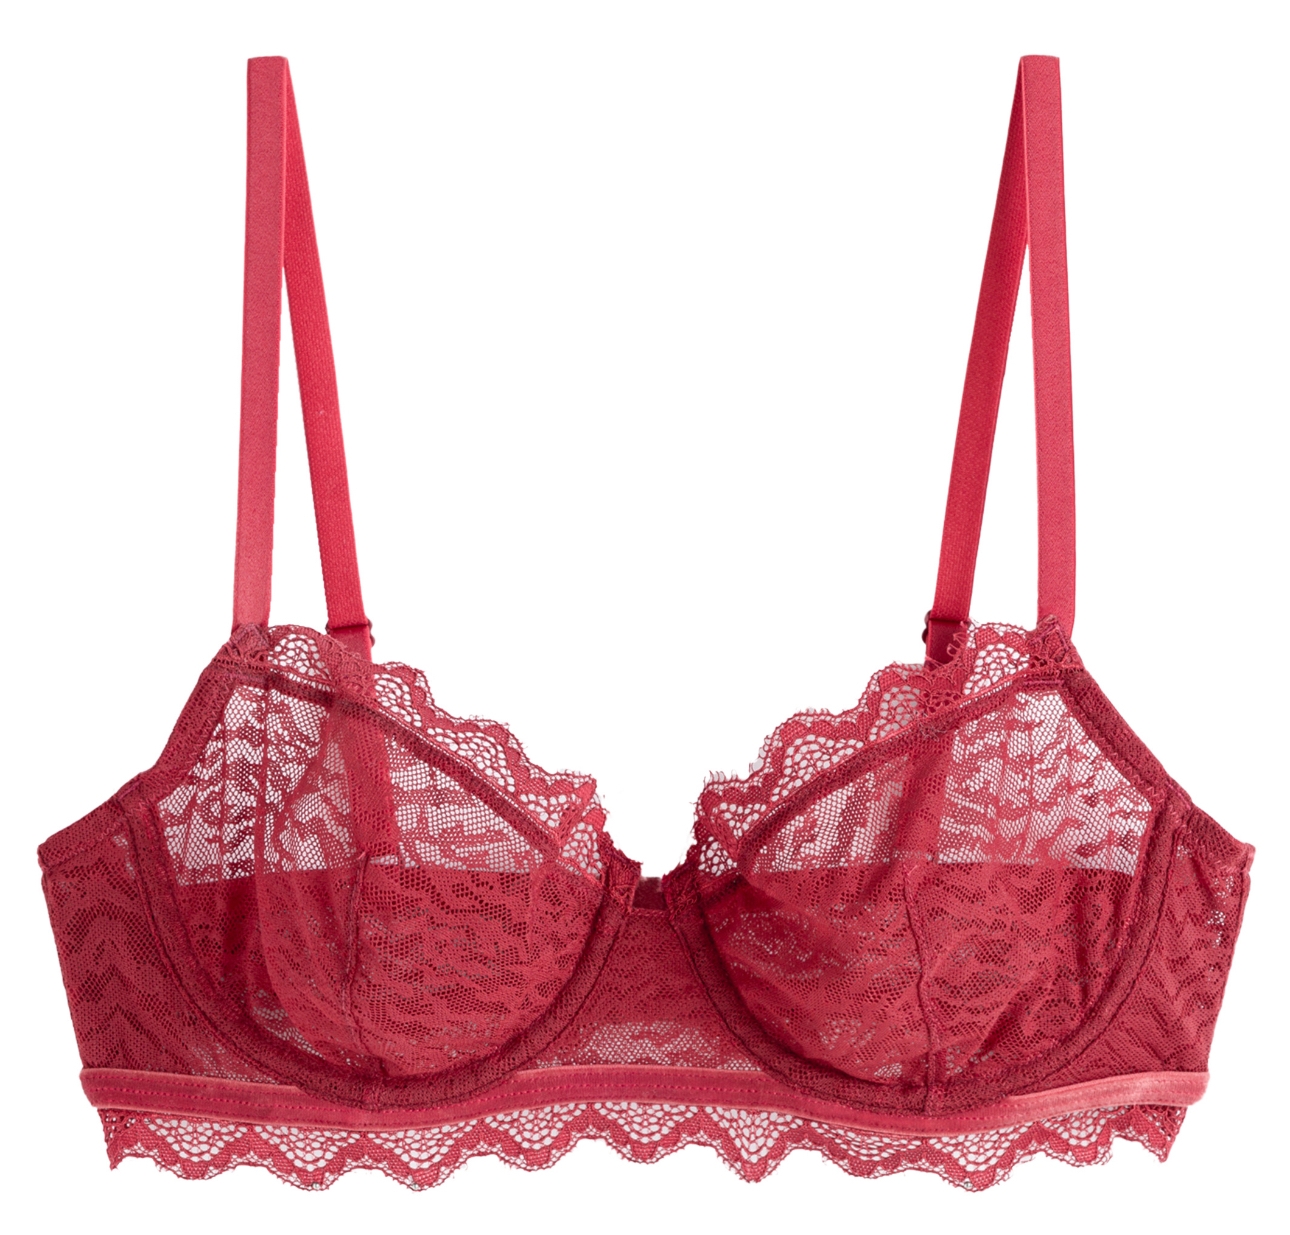 A bra from La Redoute's romantic Valentine's Day lingerie collection